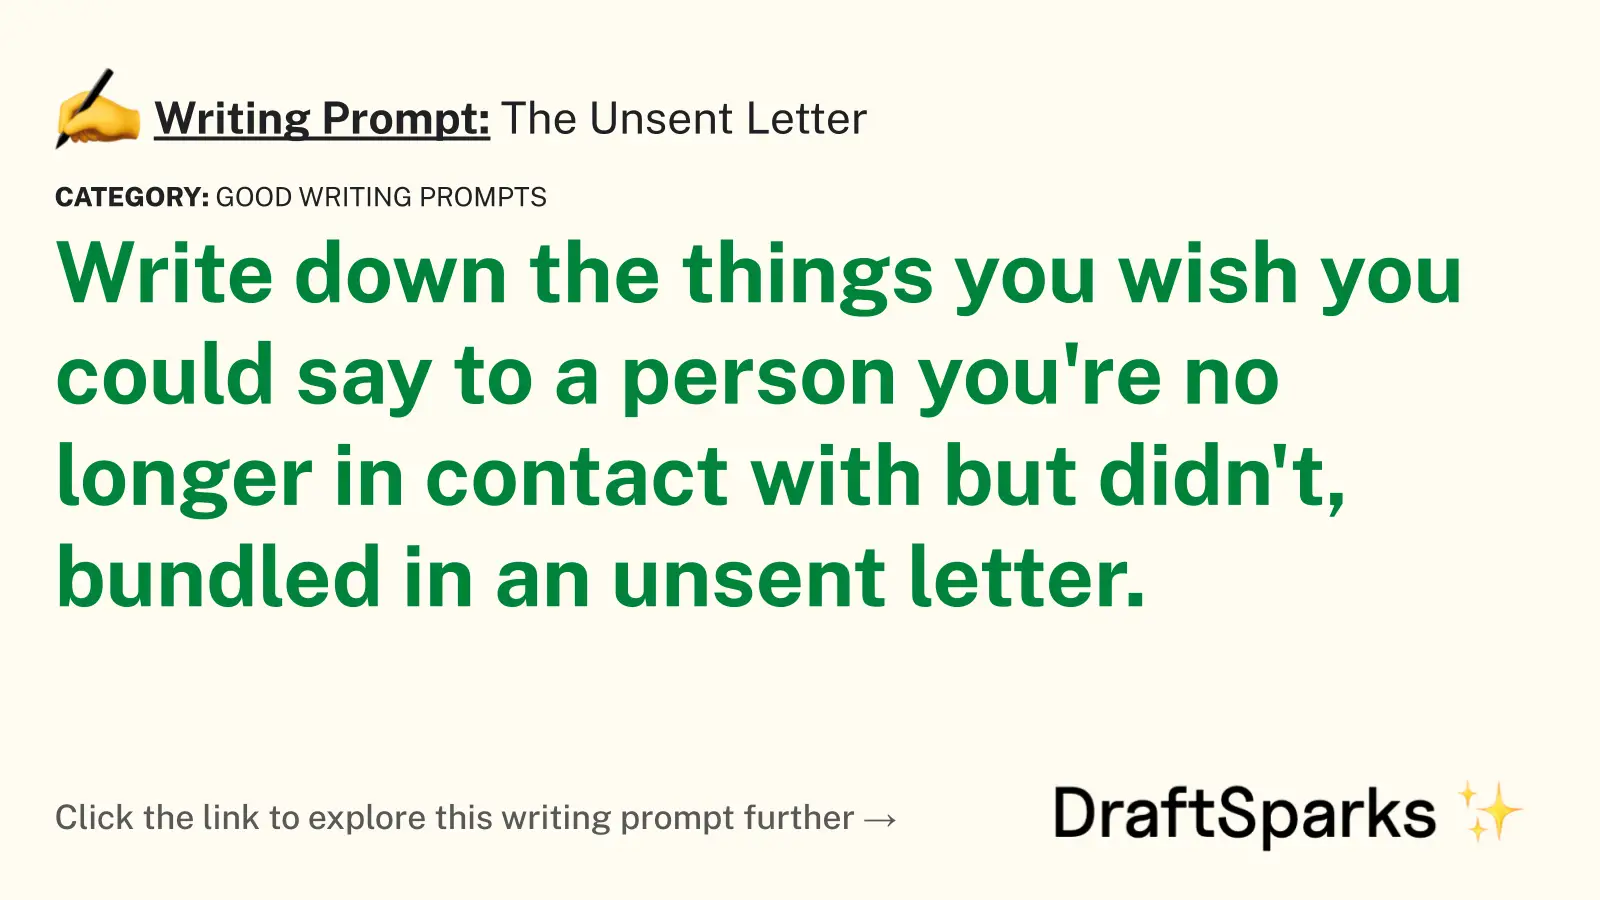 The Unsent Letter